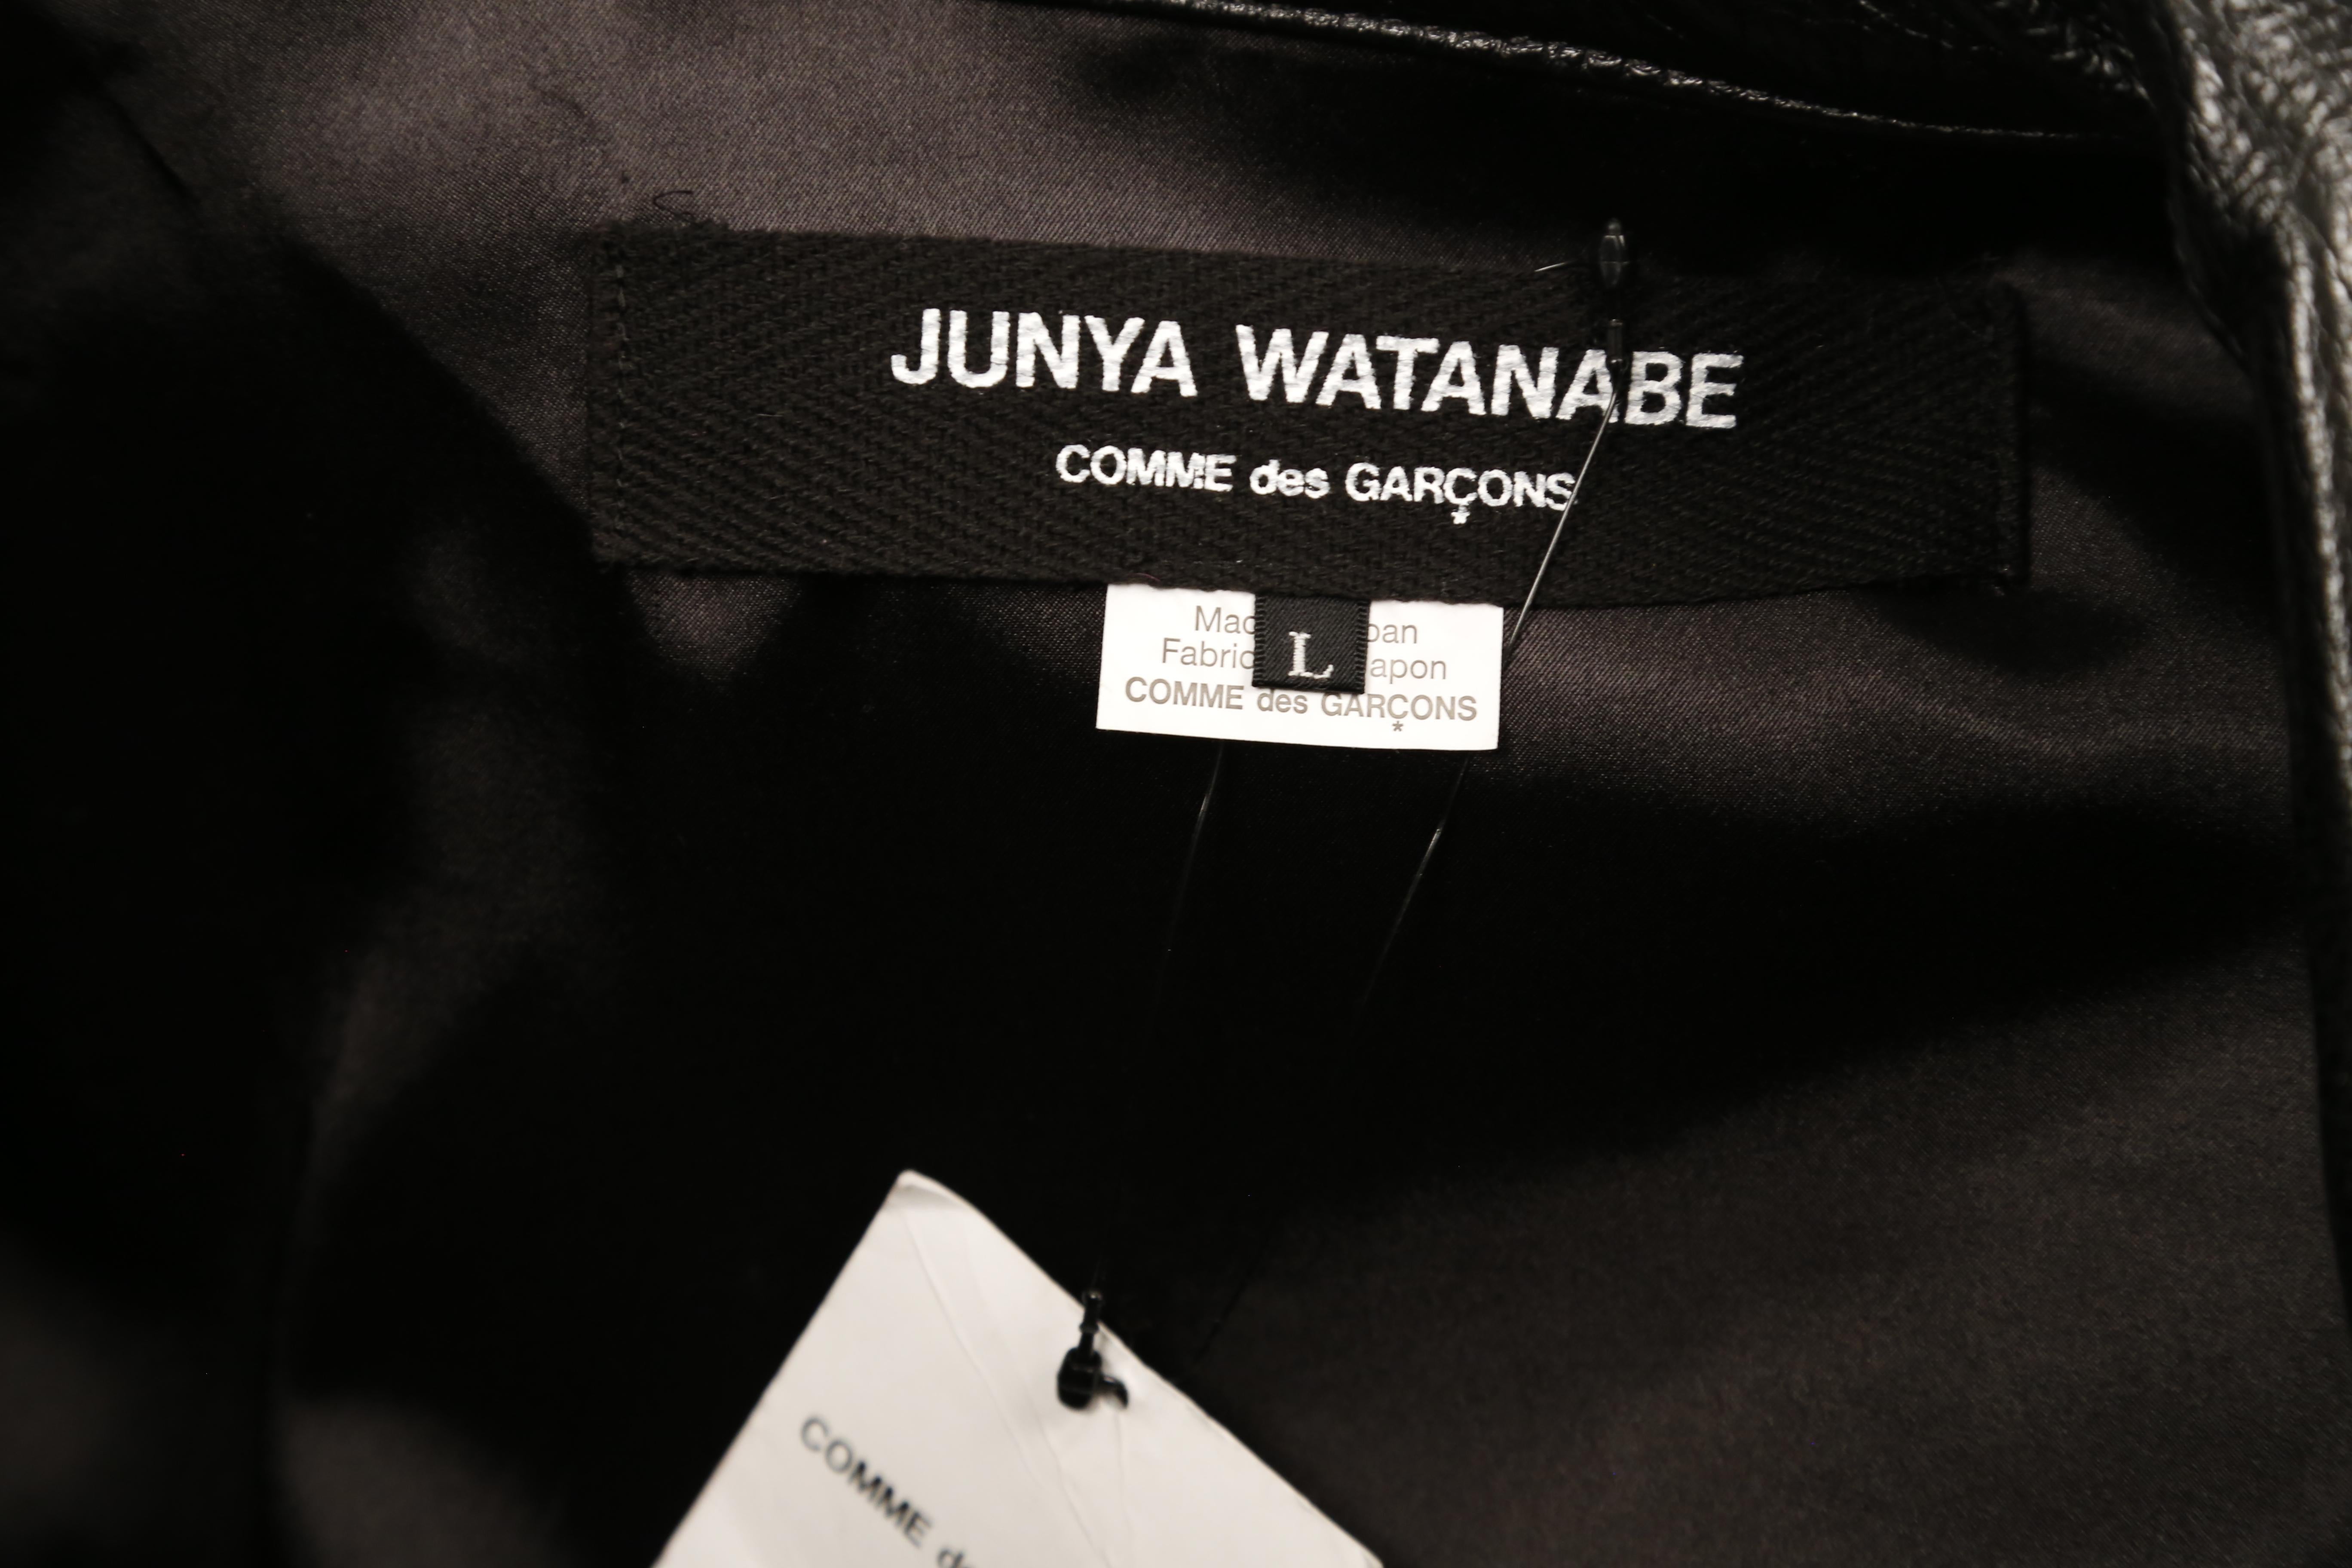 JUNYA WATANABE COMME DES GARCONS leather jacket with portrait collar - NEW 1